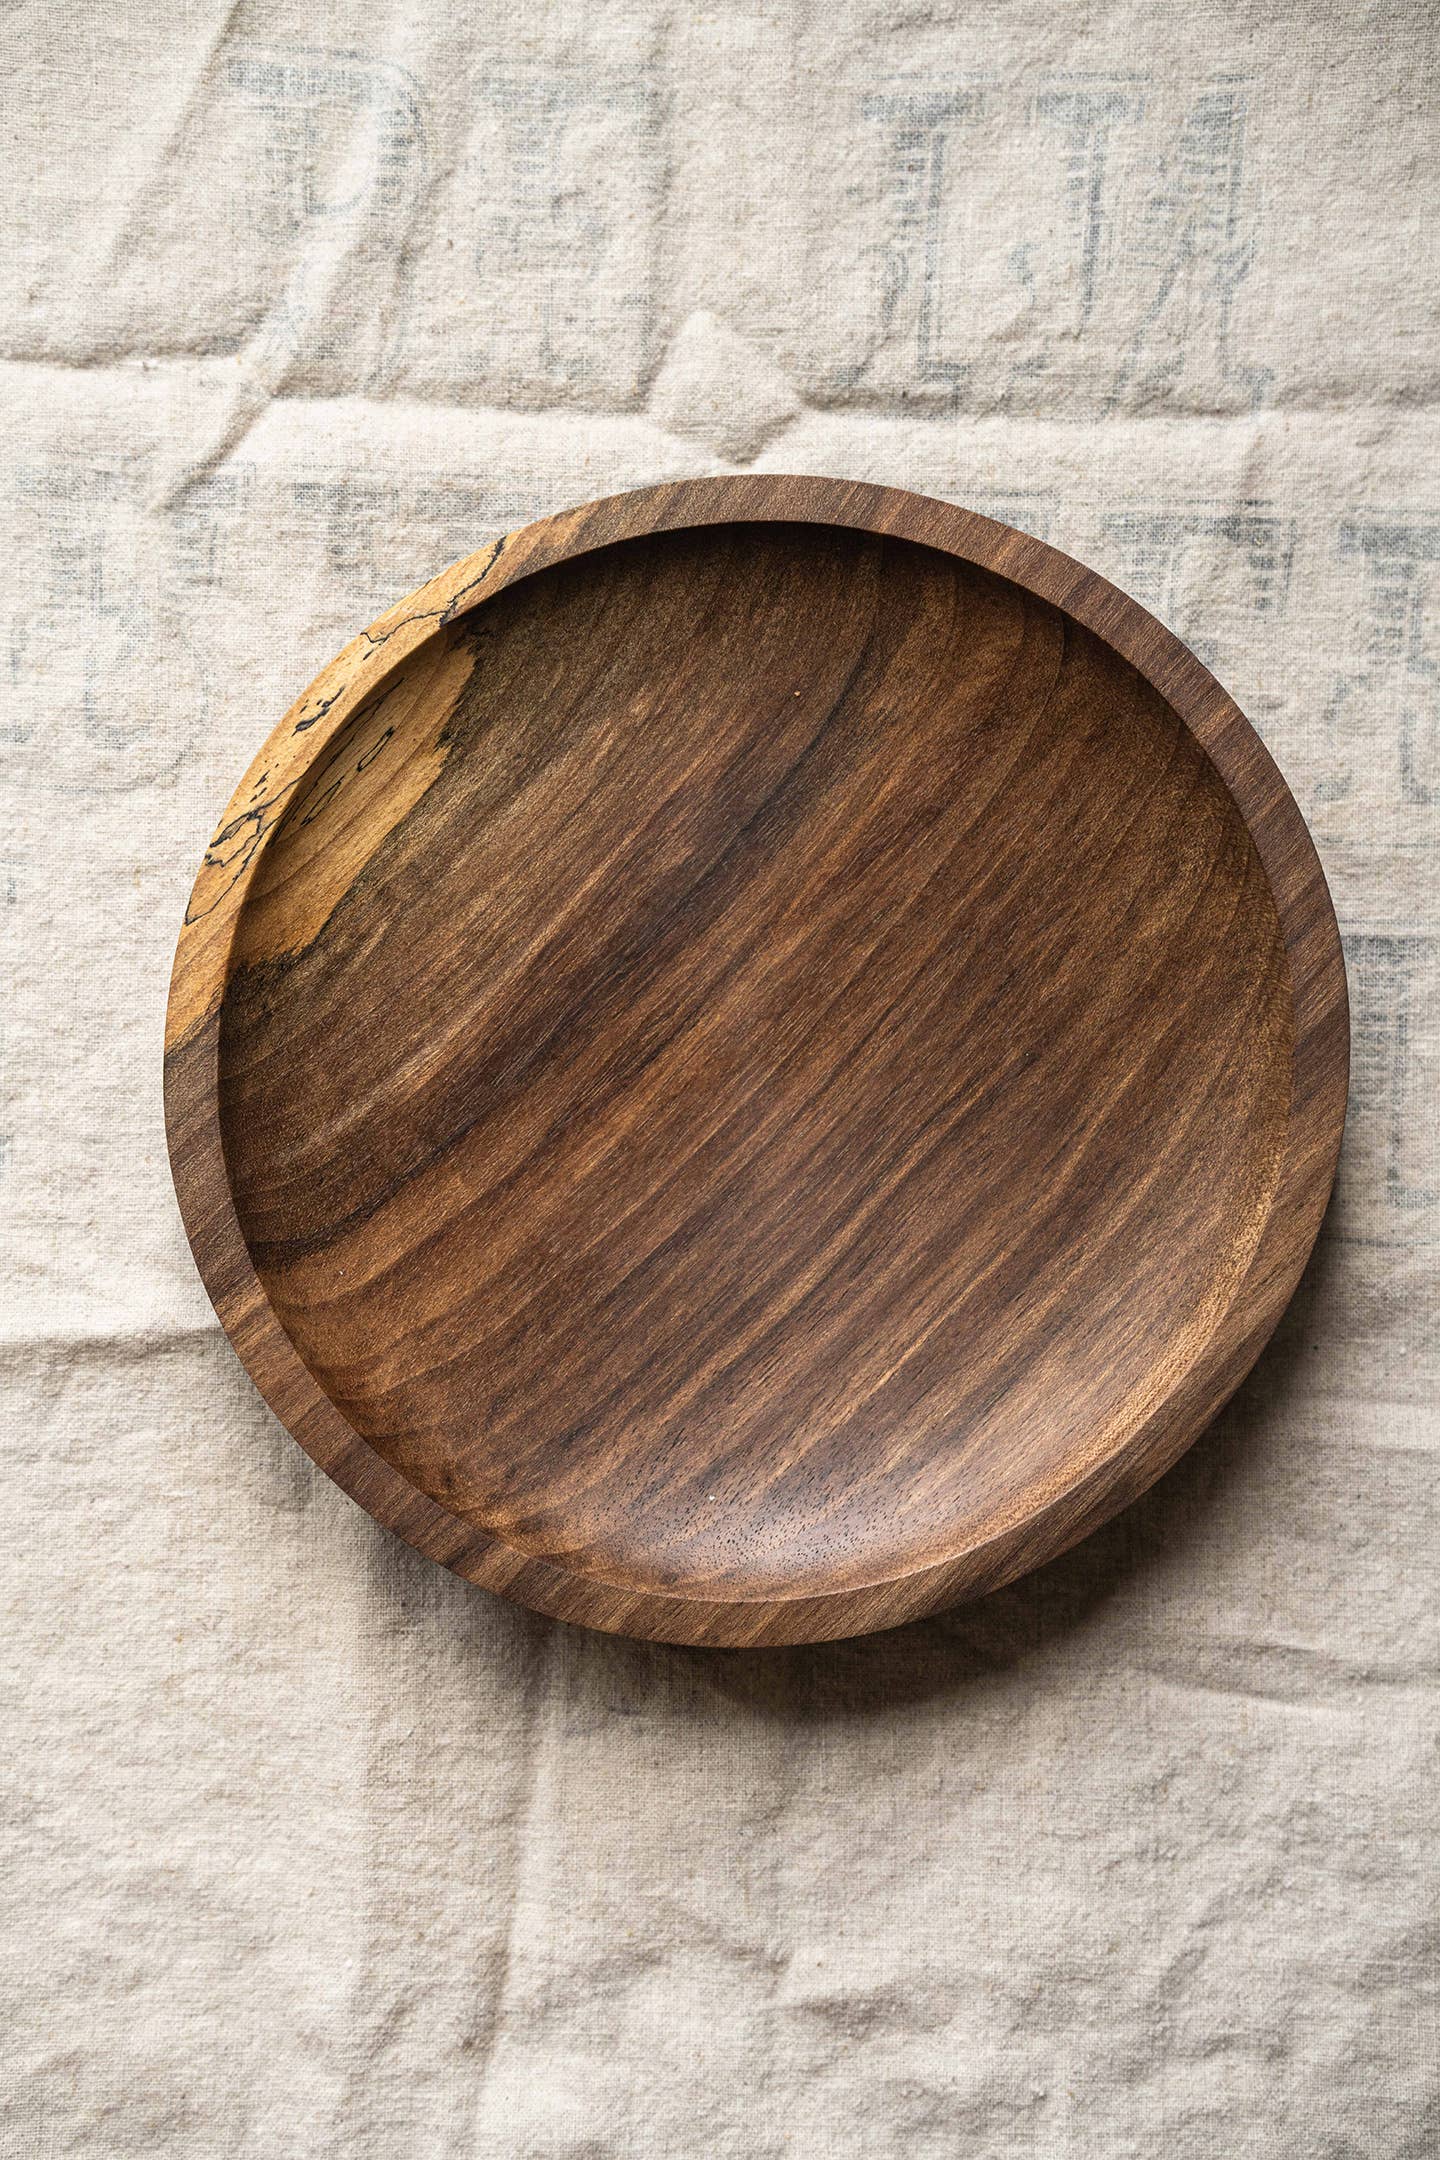 Ethical Trade Co Tabletop Salad Plate Hand-Carved Ukrainian Walnut Wood Dinner Plates